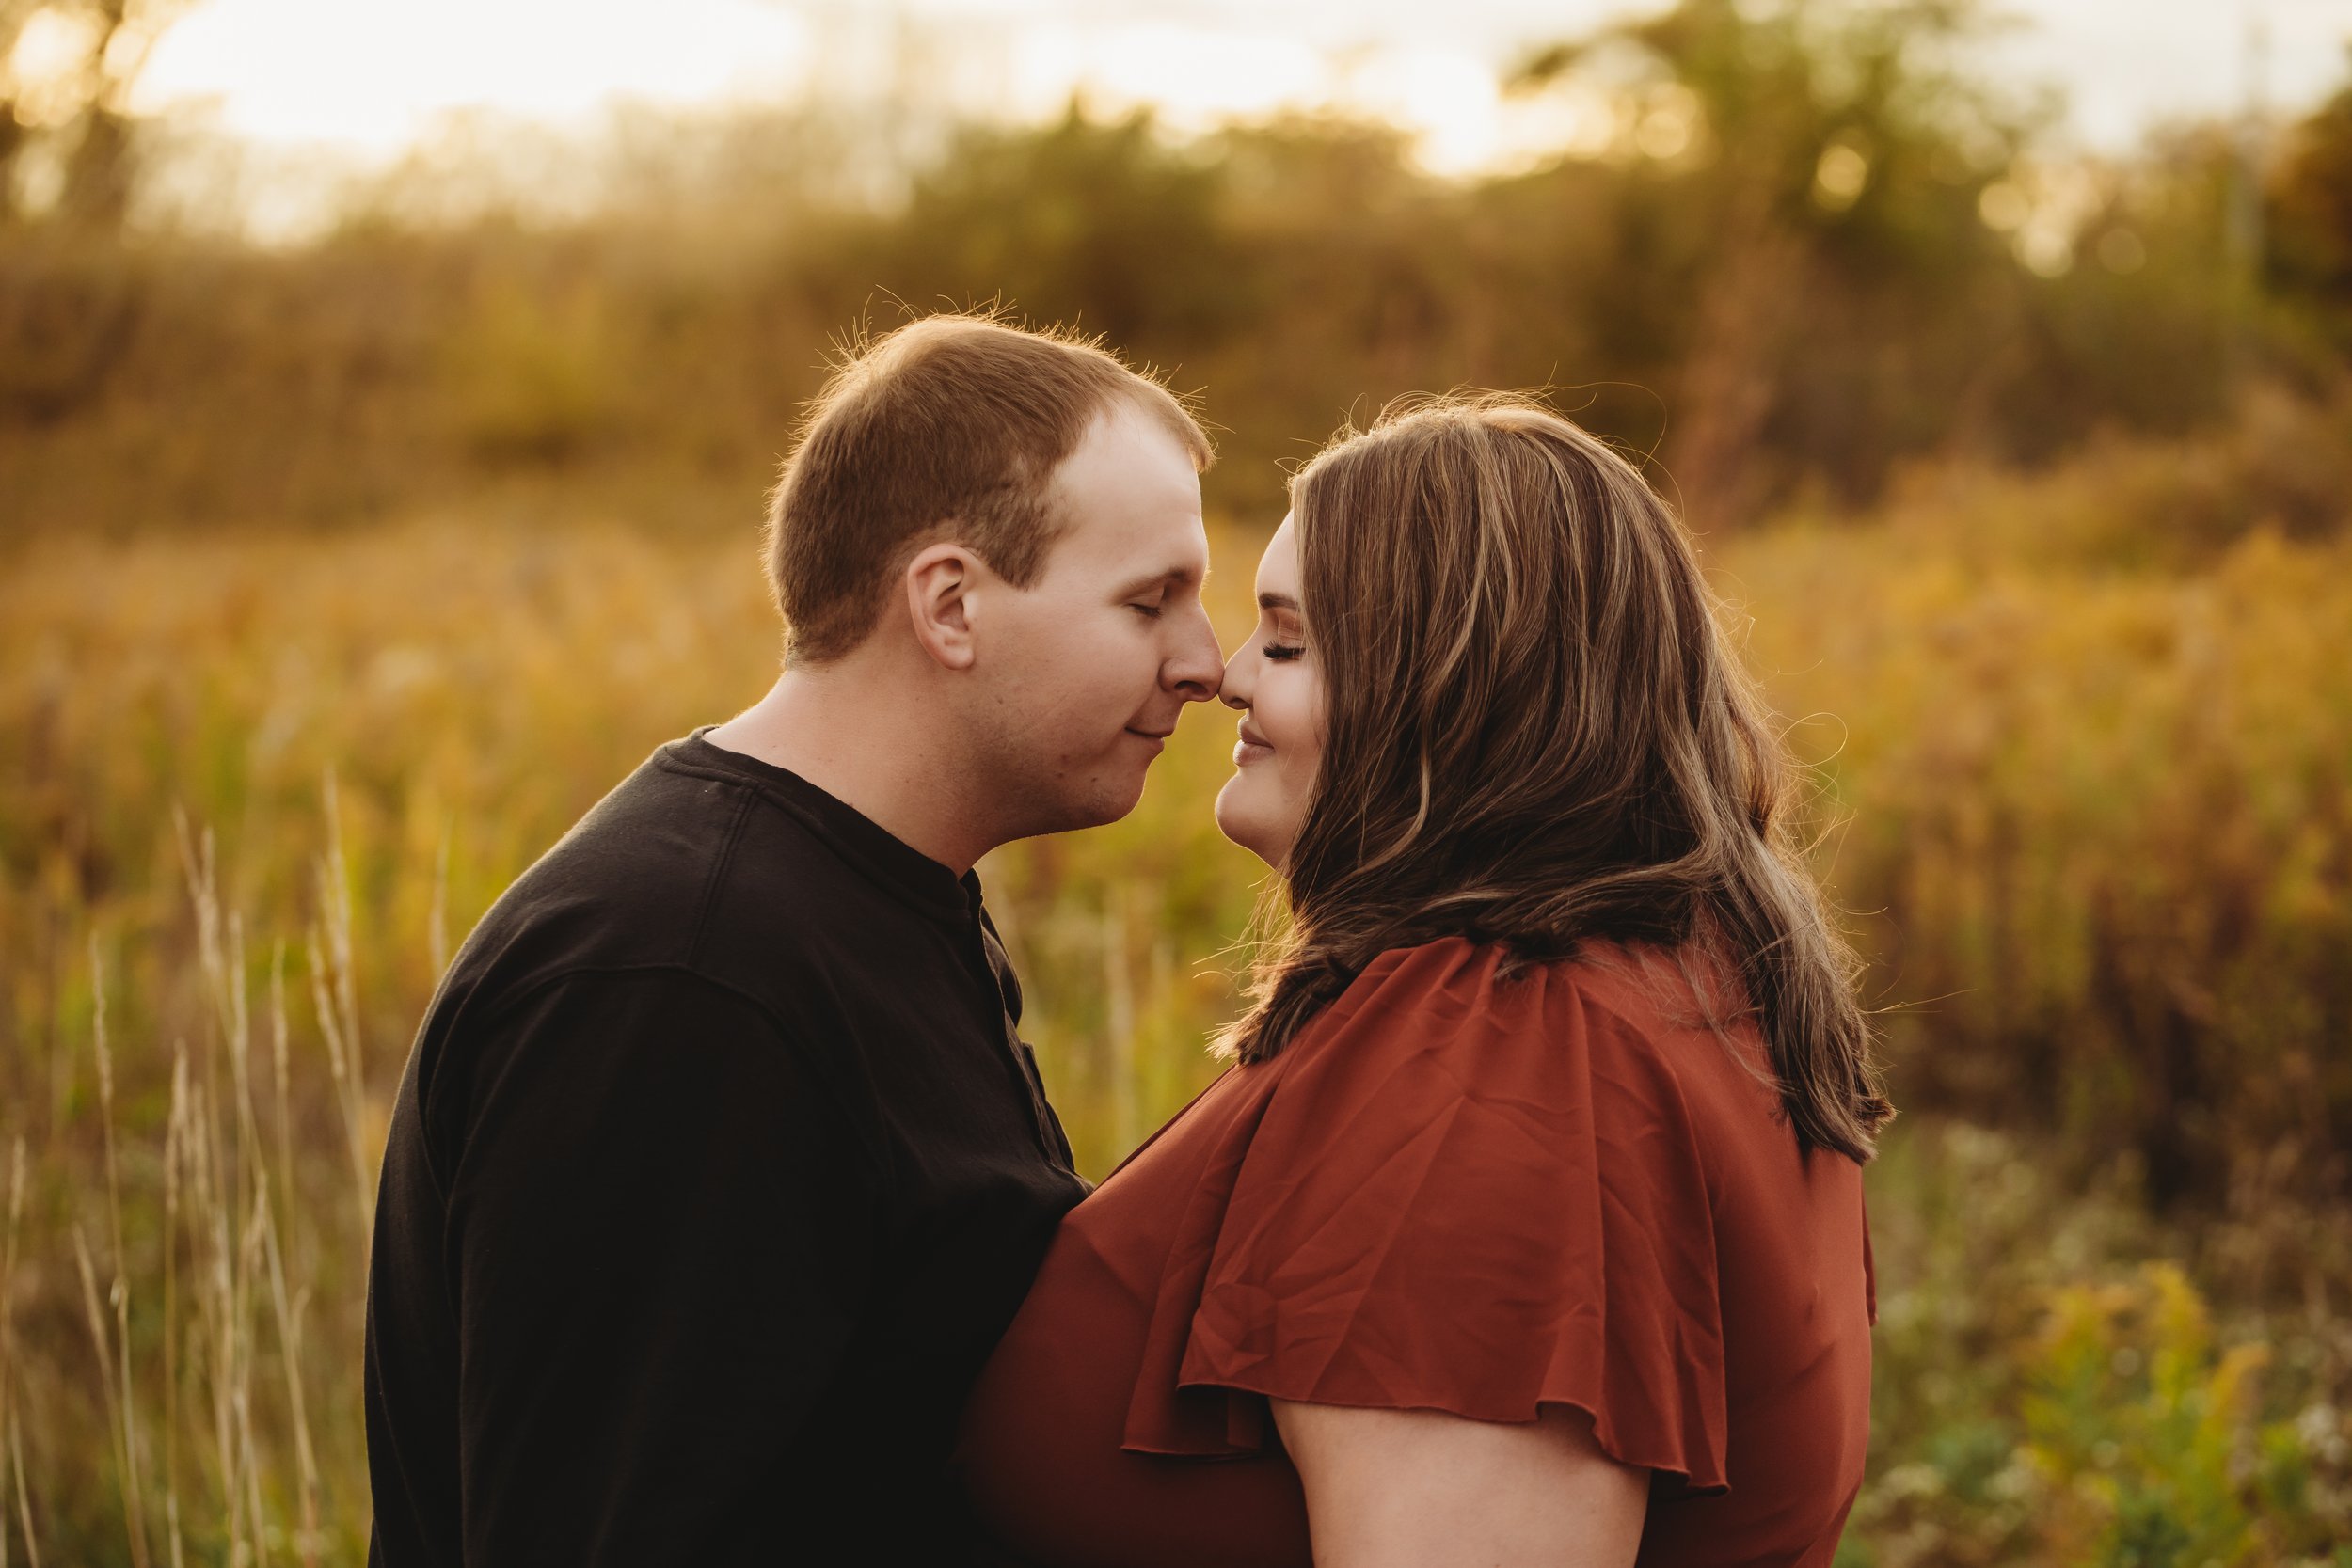  How to choose the right photographer for your wedding and engagements by Teala Ward Photography. Illinois Valley Weddings dynamic wedding portraits #TealaWardPhotography #TealaWardEngagements #Weddingphotographer #ILweddings #Weddingengagementphotog